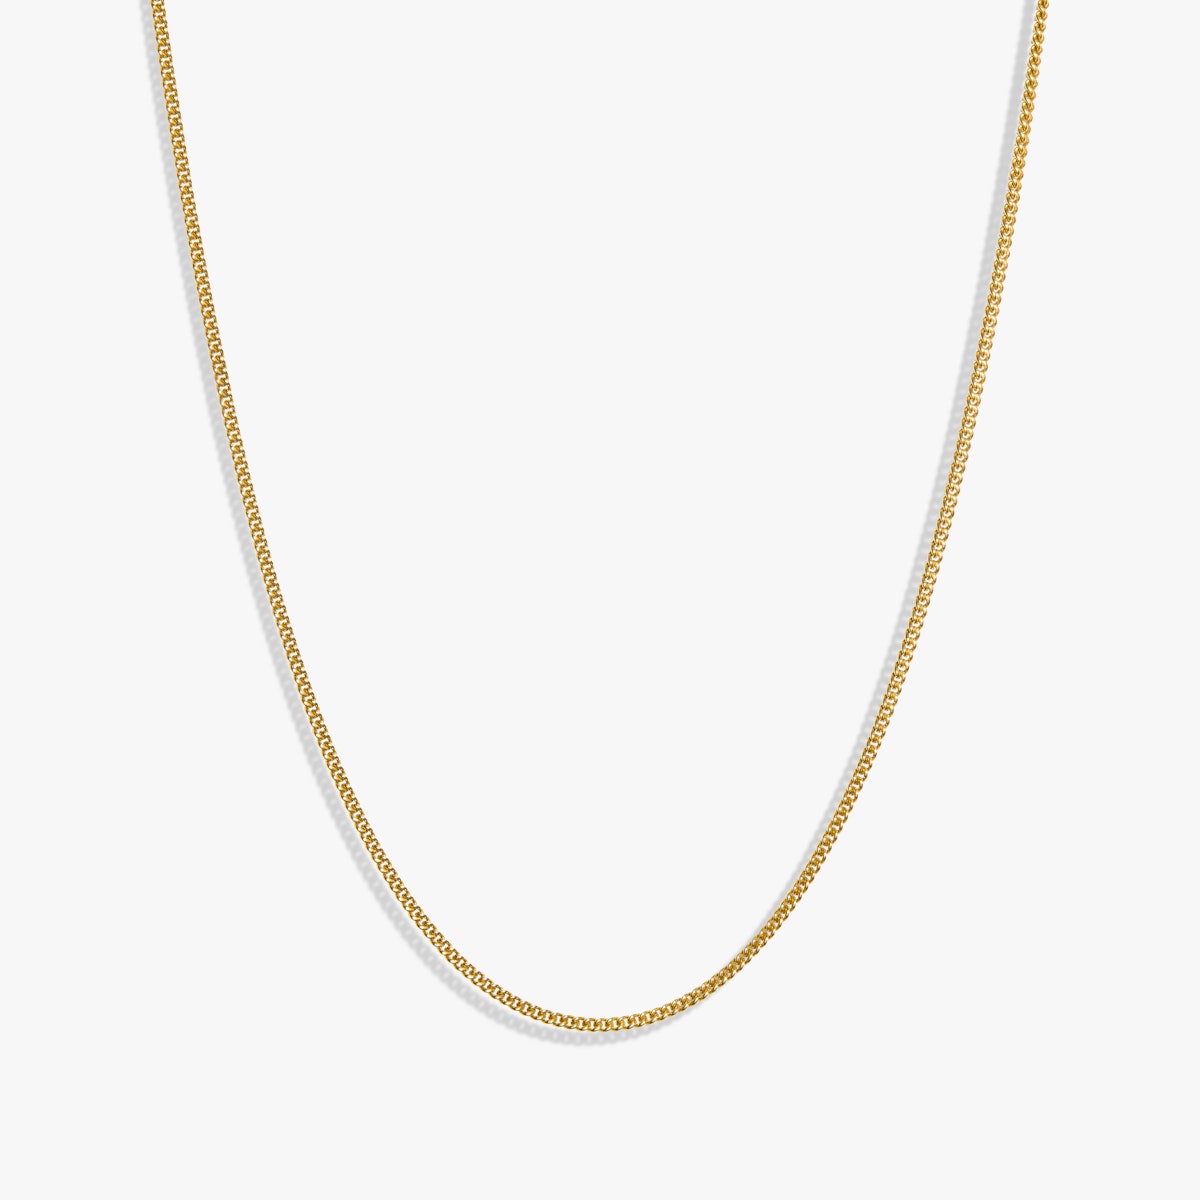 Gold Lock Pendant Necklace Curb Chain For Men or Women